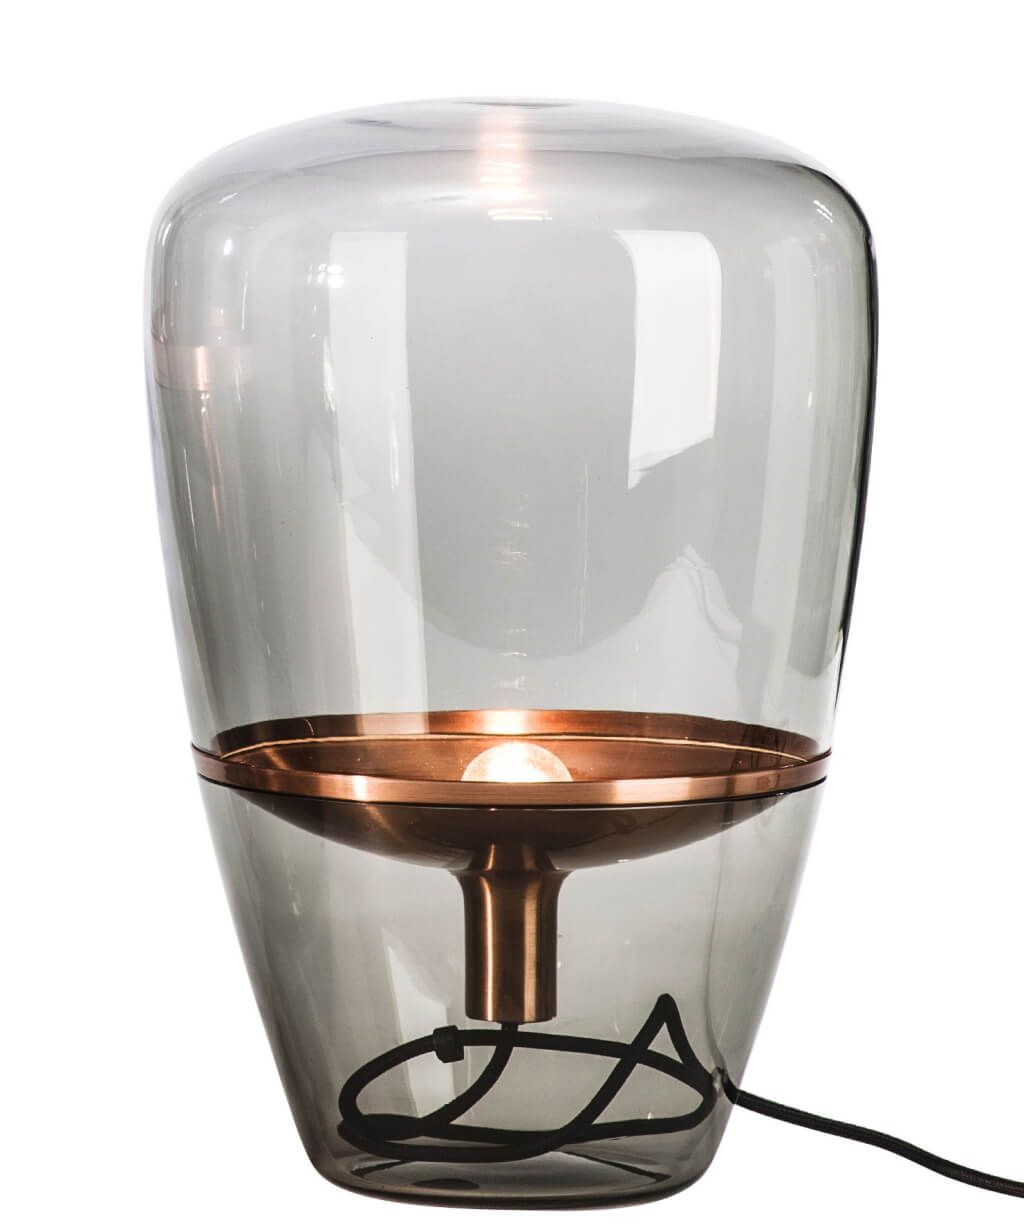 lighting rustic clear glass small table lamp design with inner floating copper fitting top lamps accent decorative chairs target bistro accessories pier imports outdoor prep